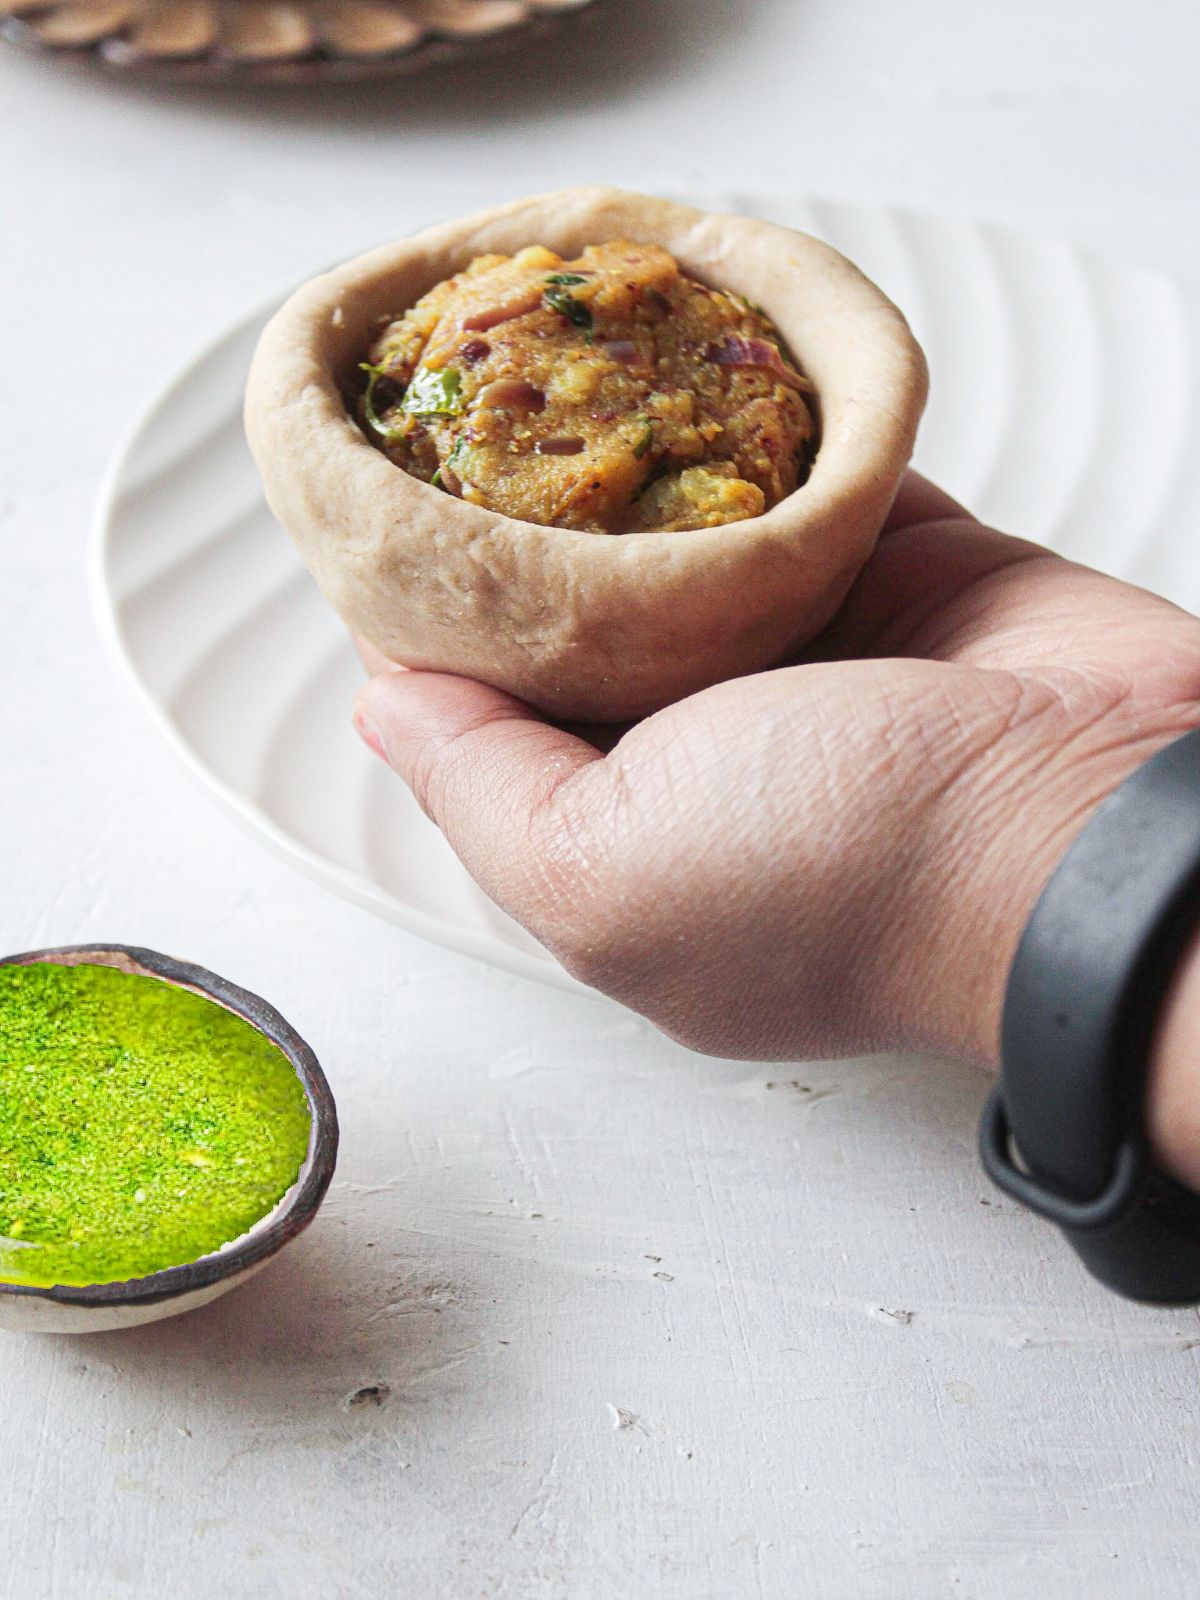 Hand holding dough bowl filled with potatoes and spices